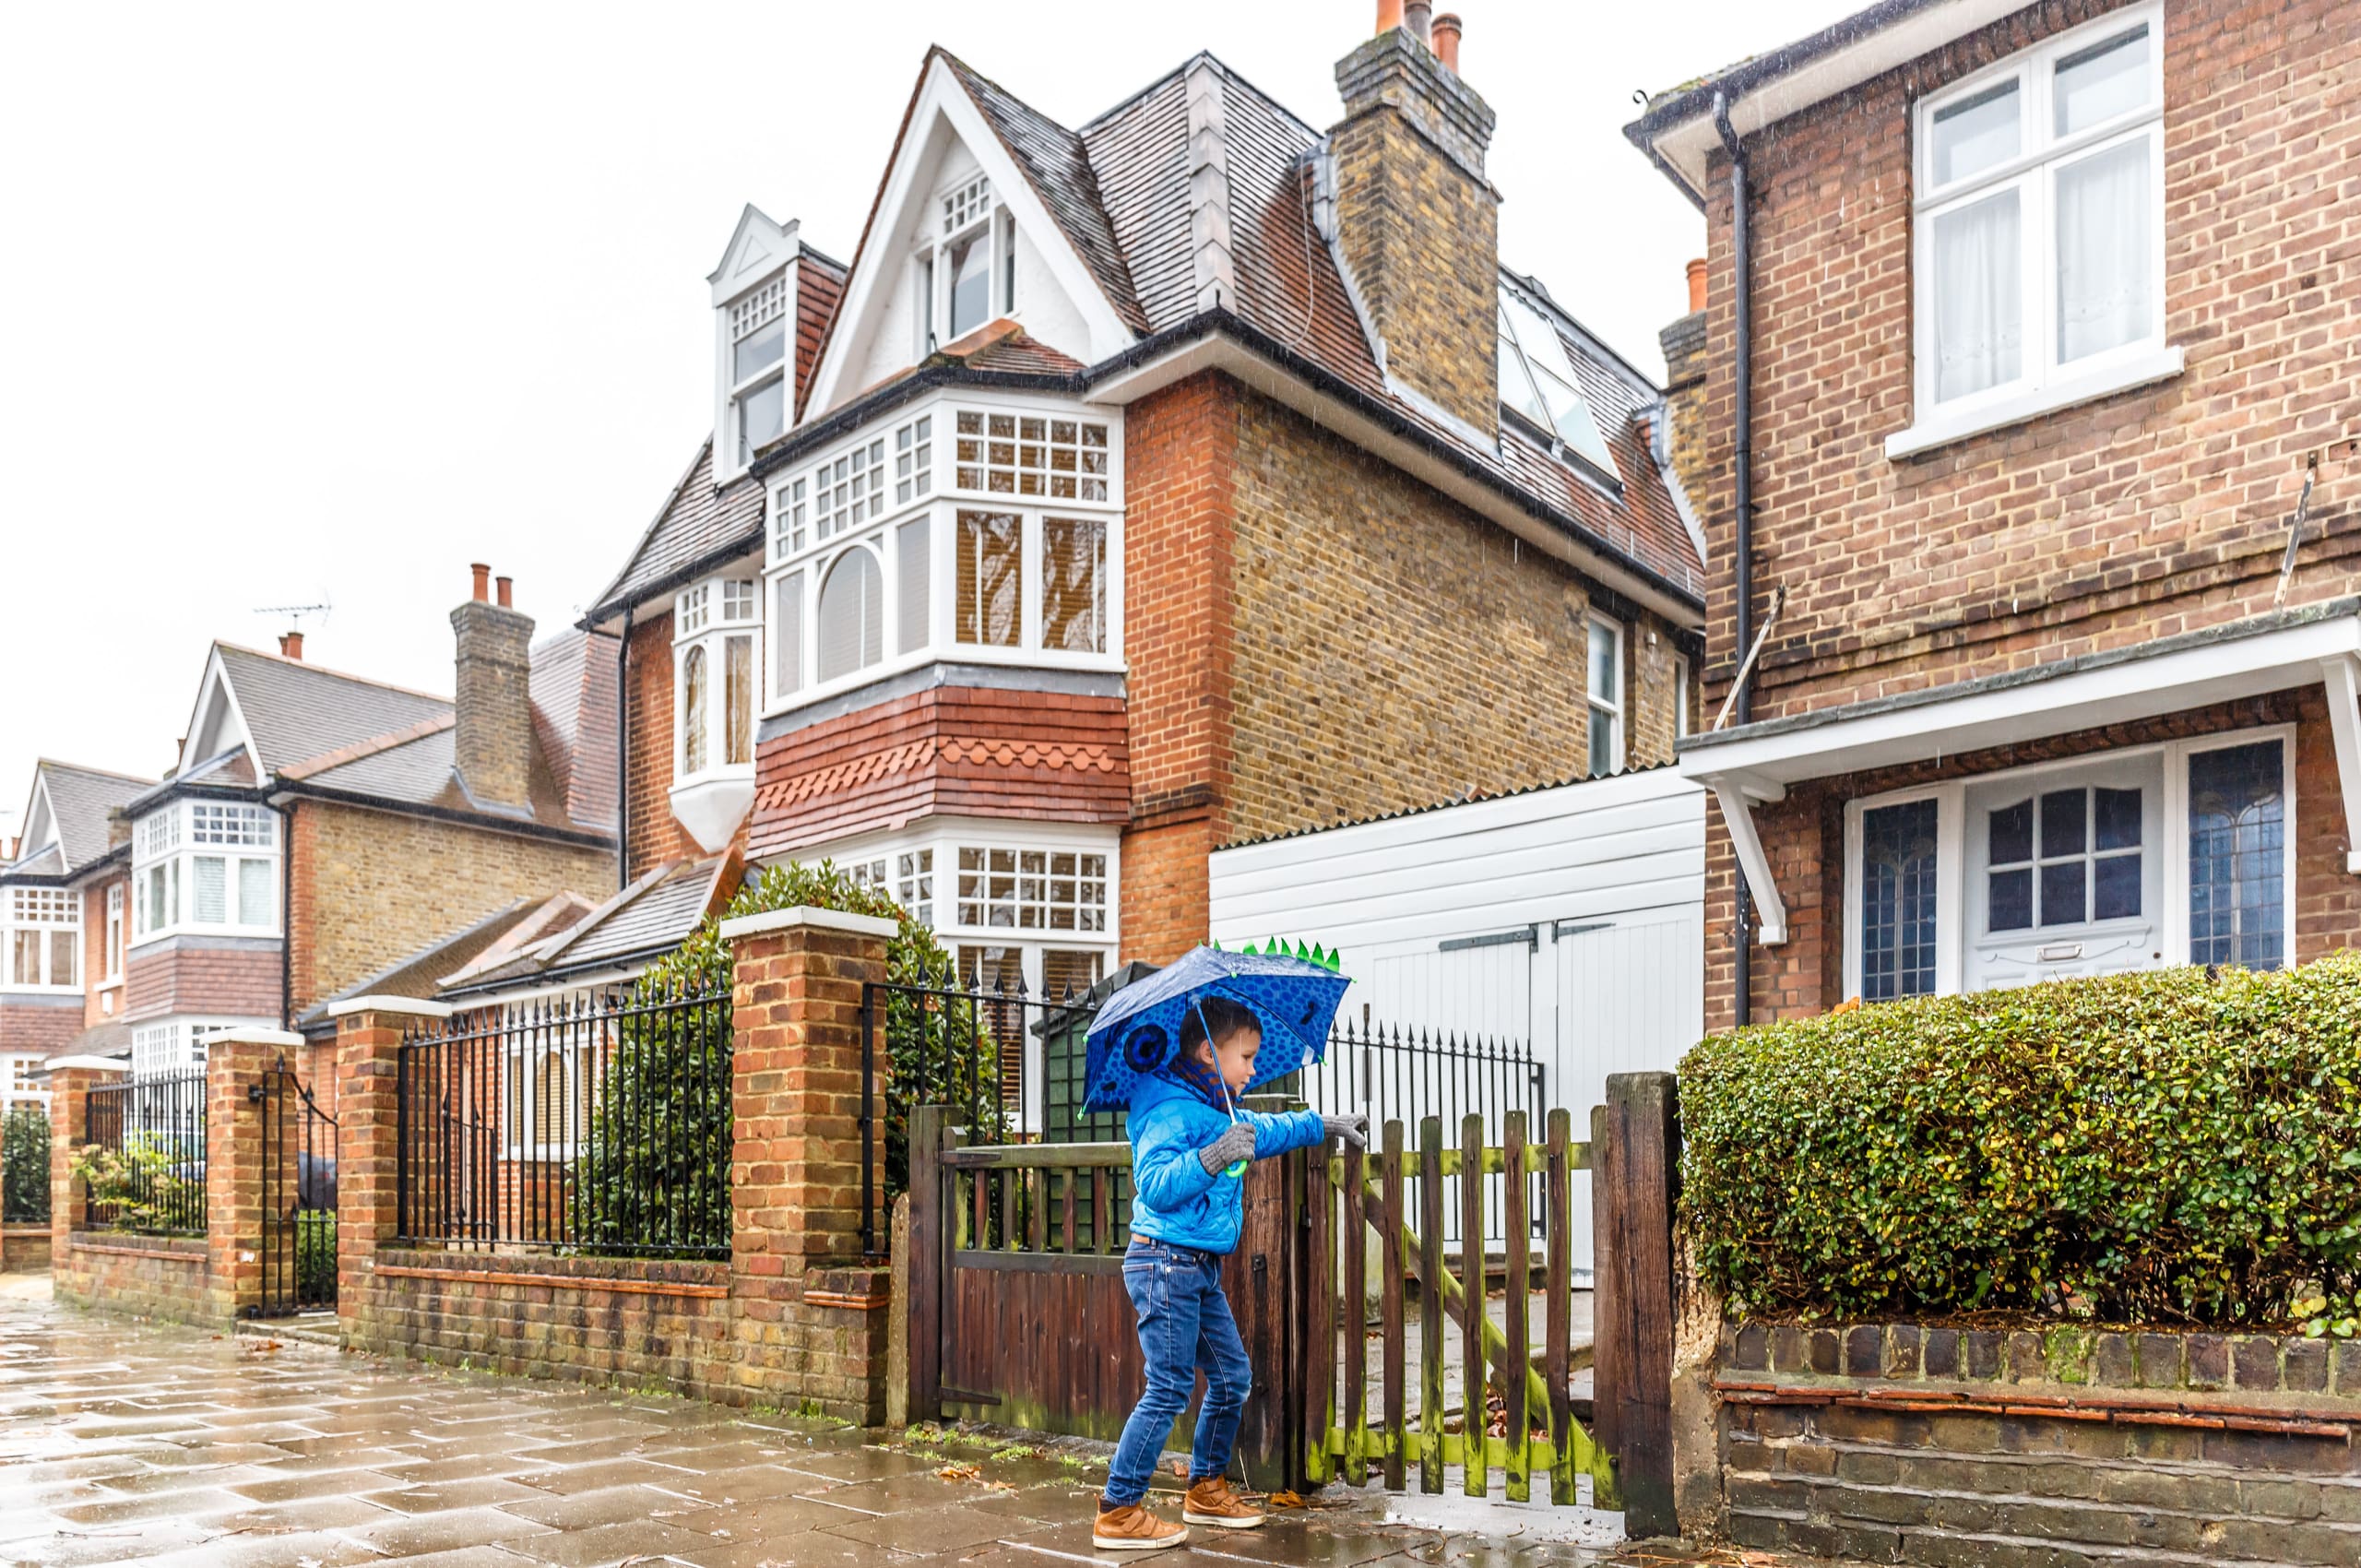 Millions of fixed-rate mortgages are ending. Discover 6 practical steps you can take now